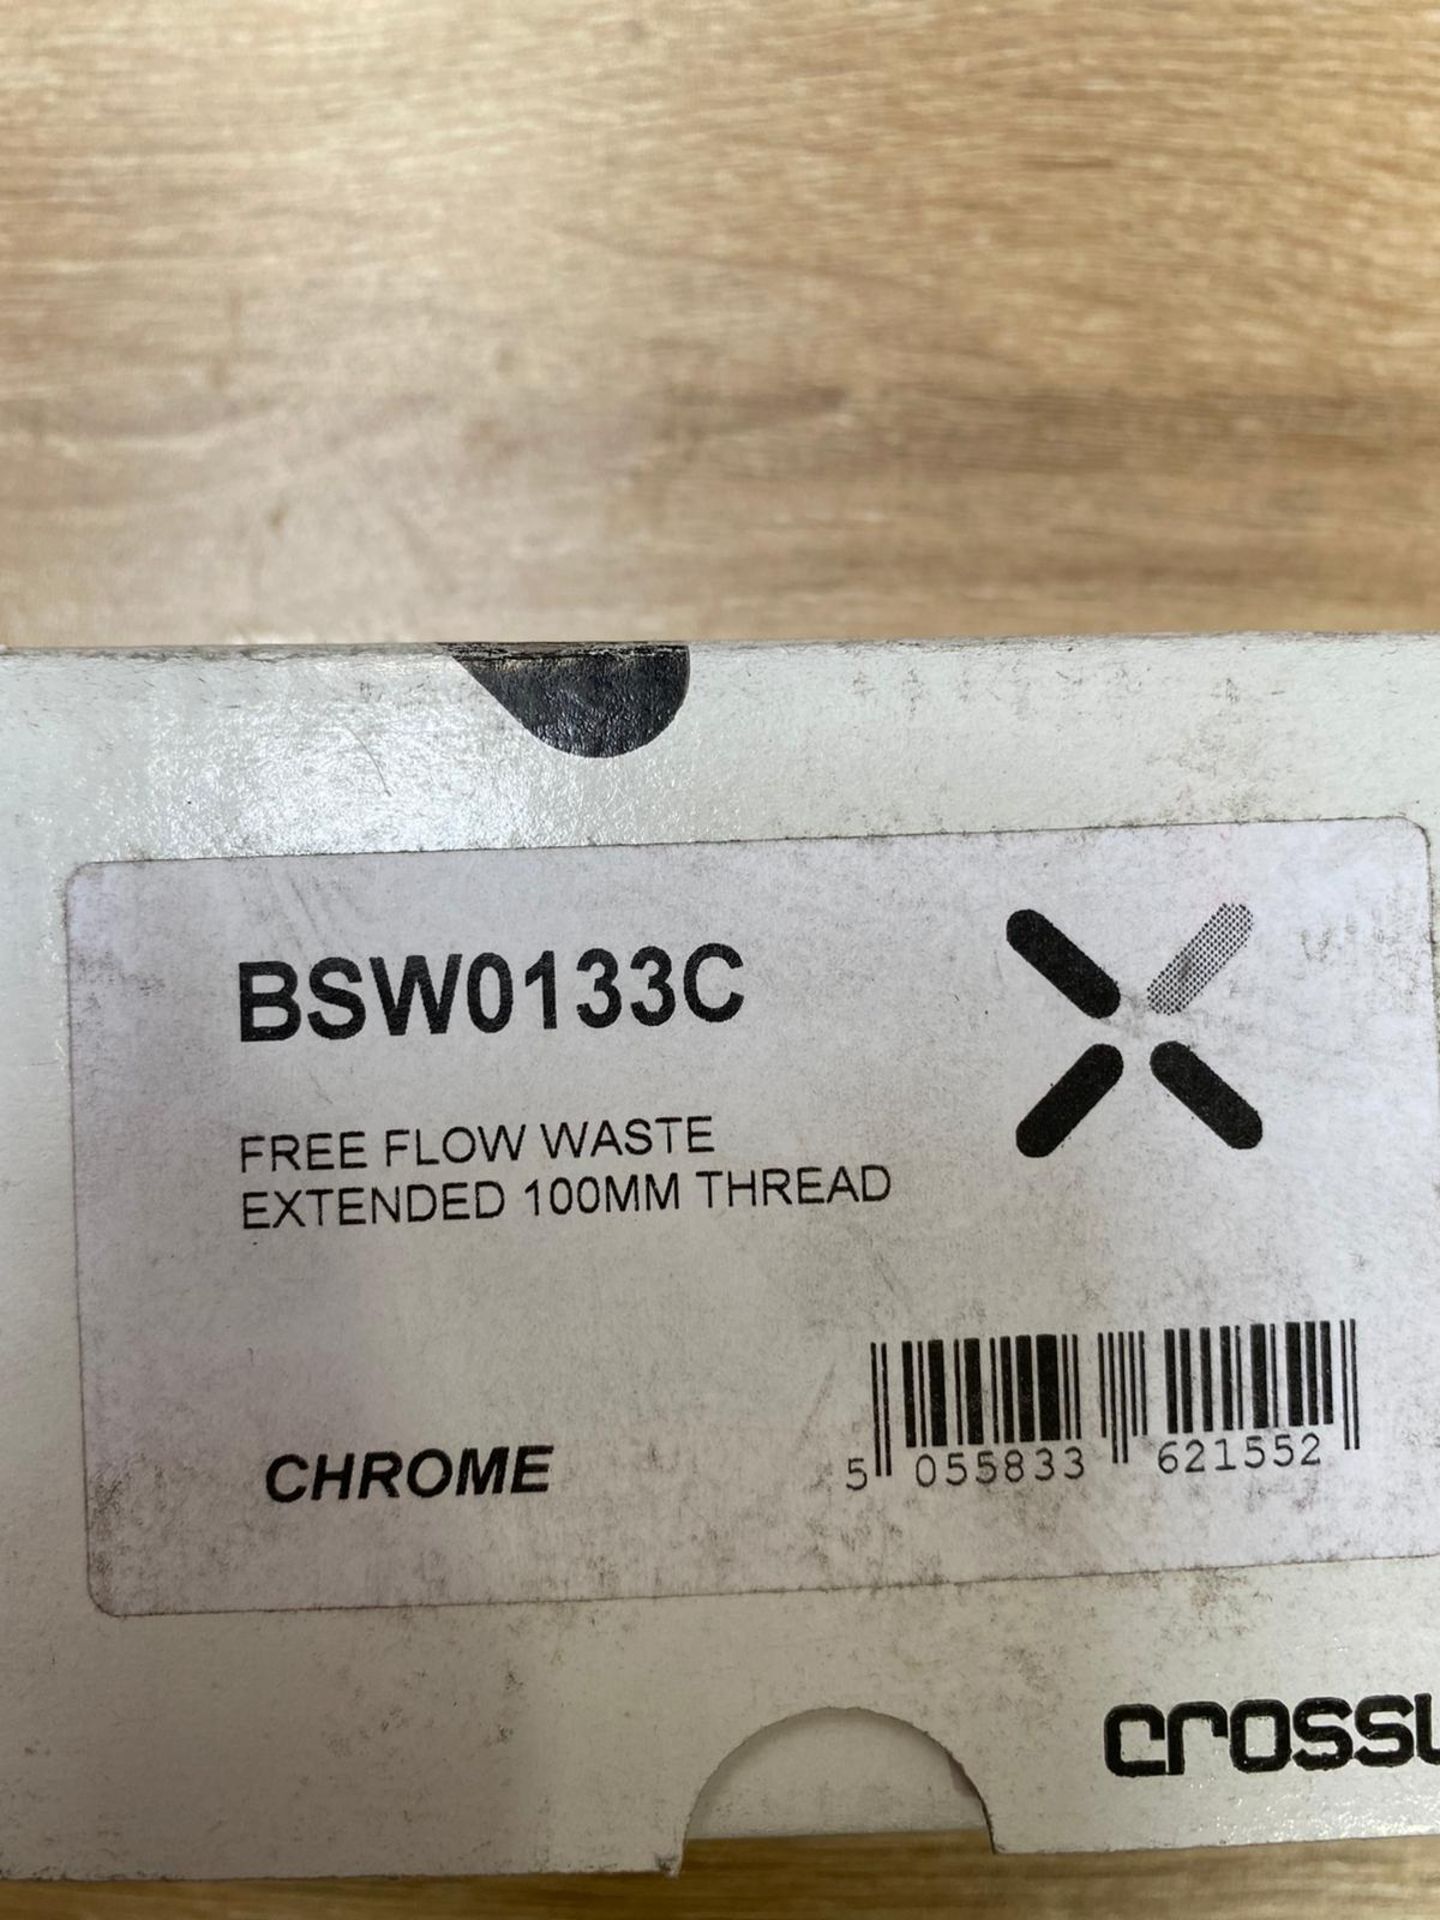 1 x CROSSWATER Free Flow Waste Extended 100mm Thread - Product Code: BSW0133C - New Boxed Stock - Image 2 of 3